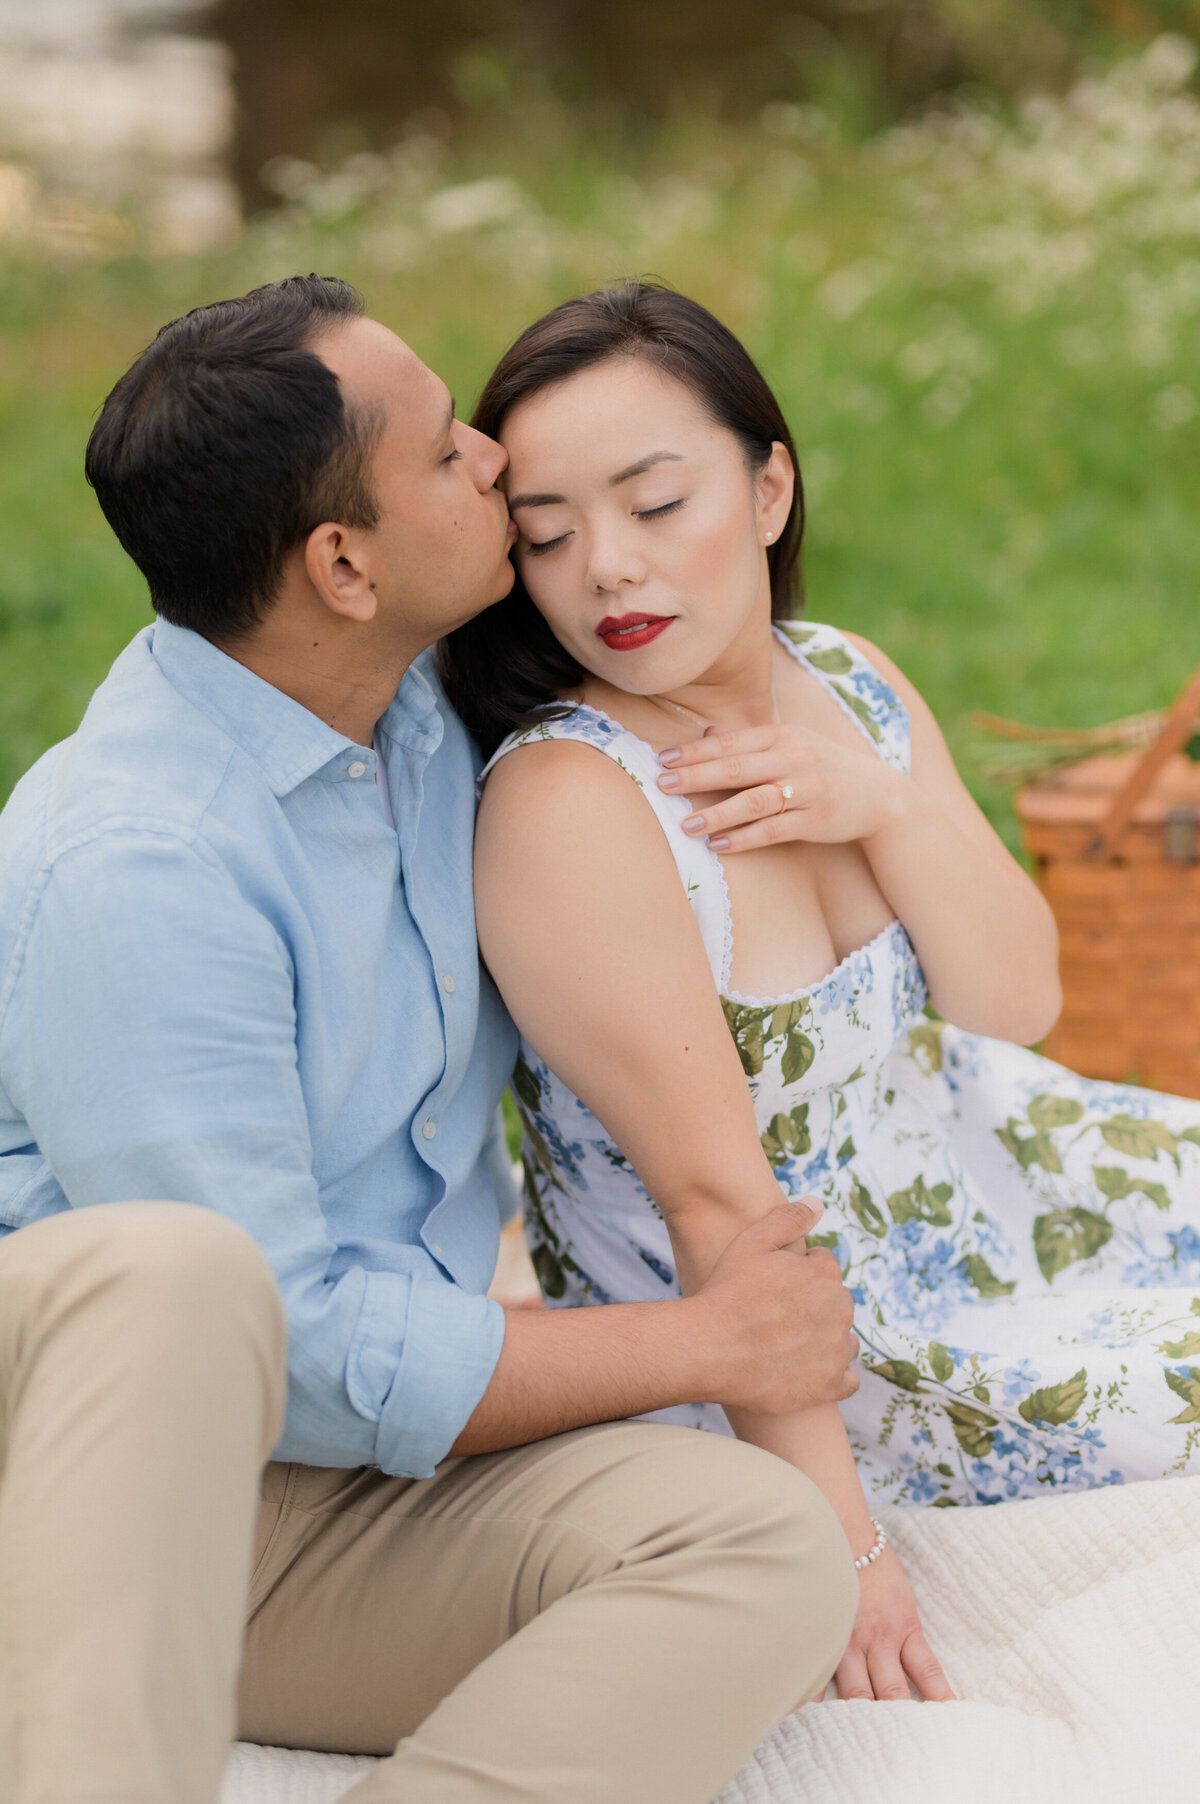 multicultural couple engagement session and a picnic at the park in new england. indain man and asian women eat ice cream and playful portraits.